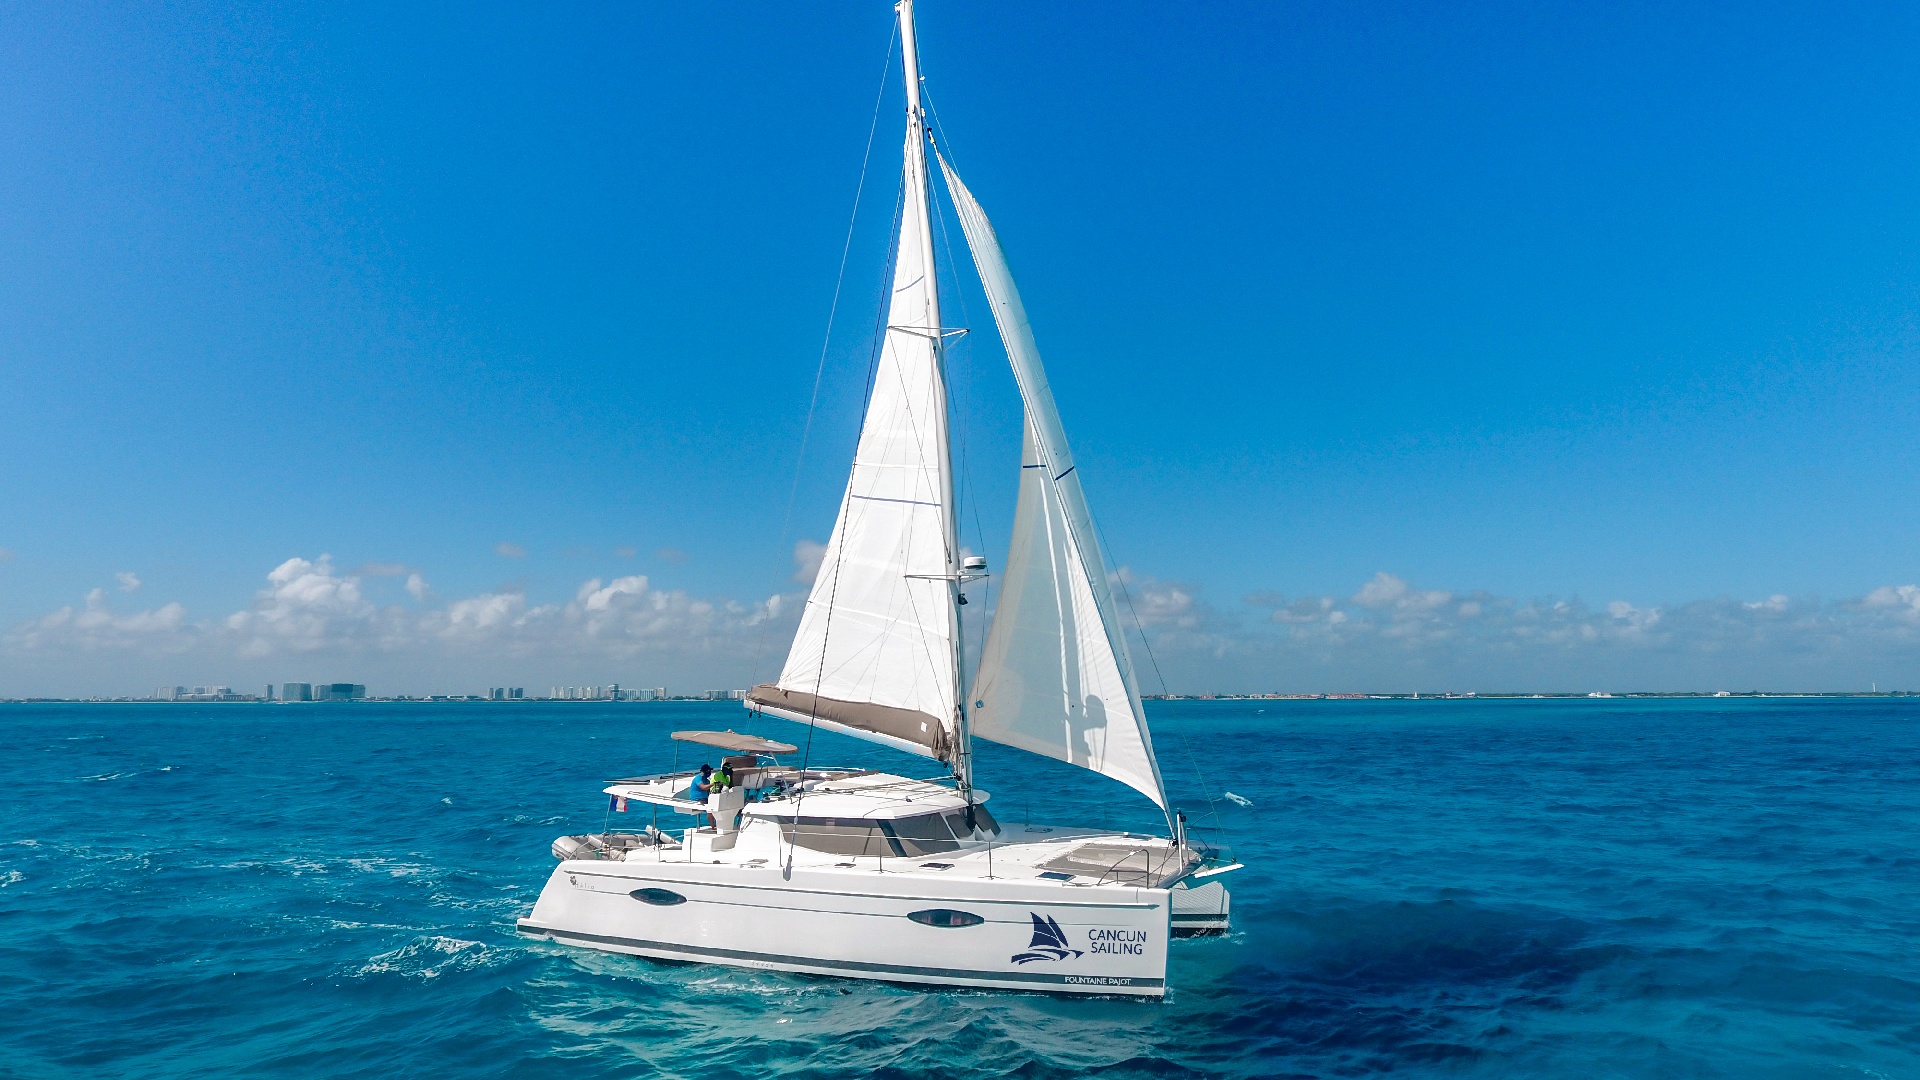 5 - LowRes - Gypse - Private tour to Isla Mujeres in catamaran - Cancun Sailing